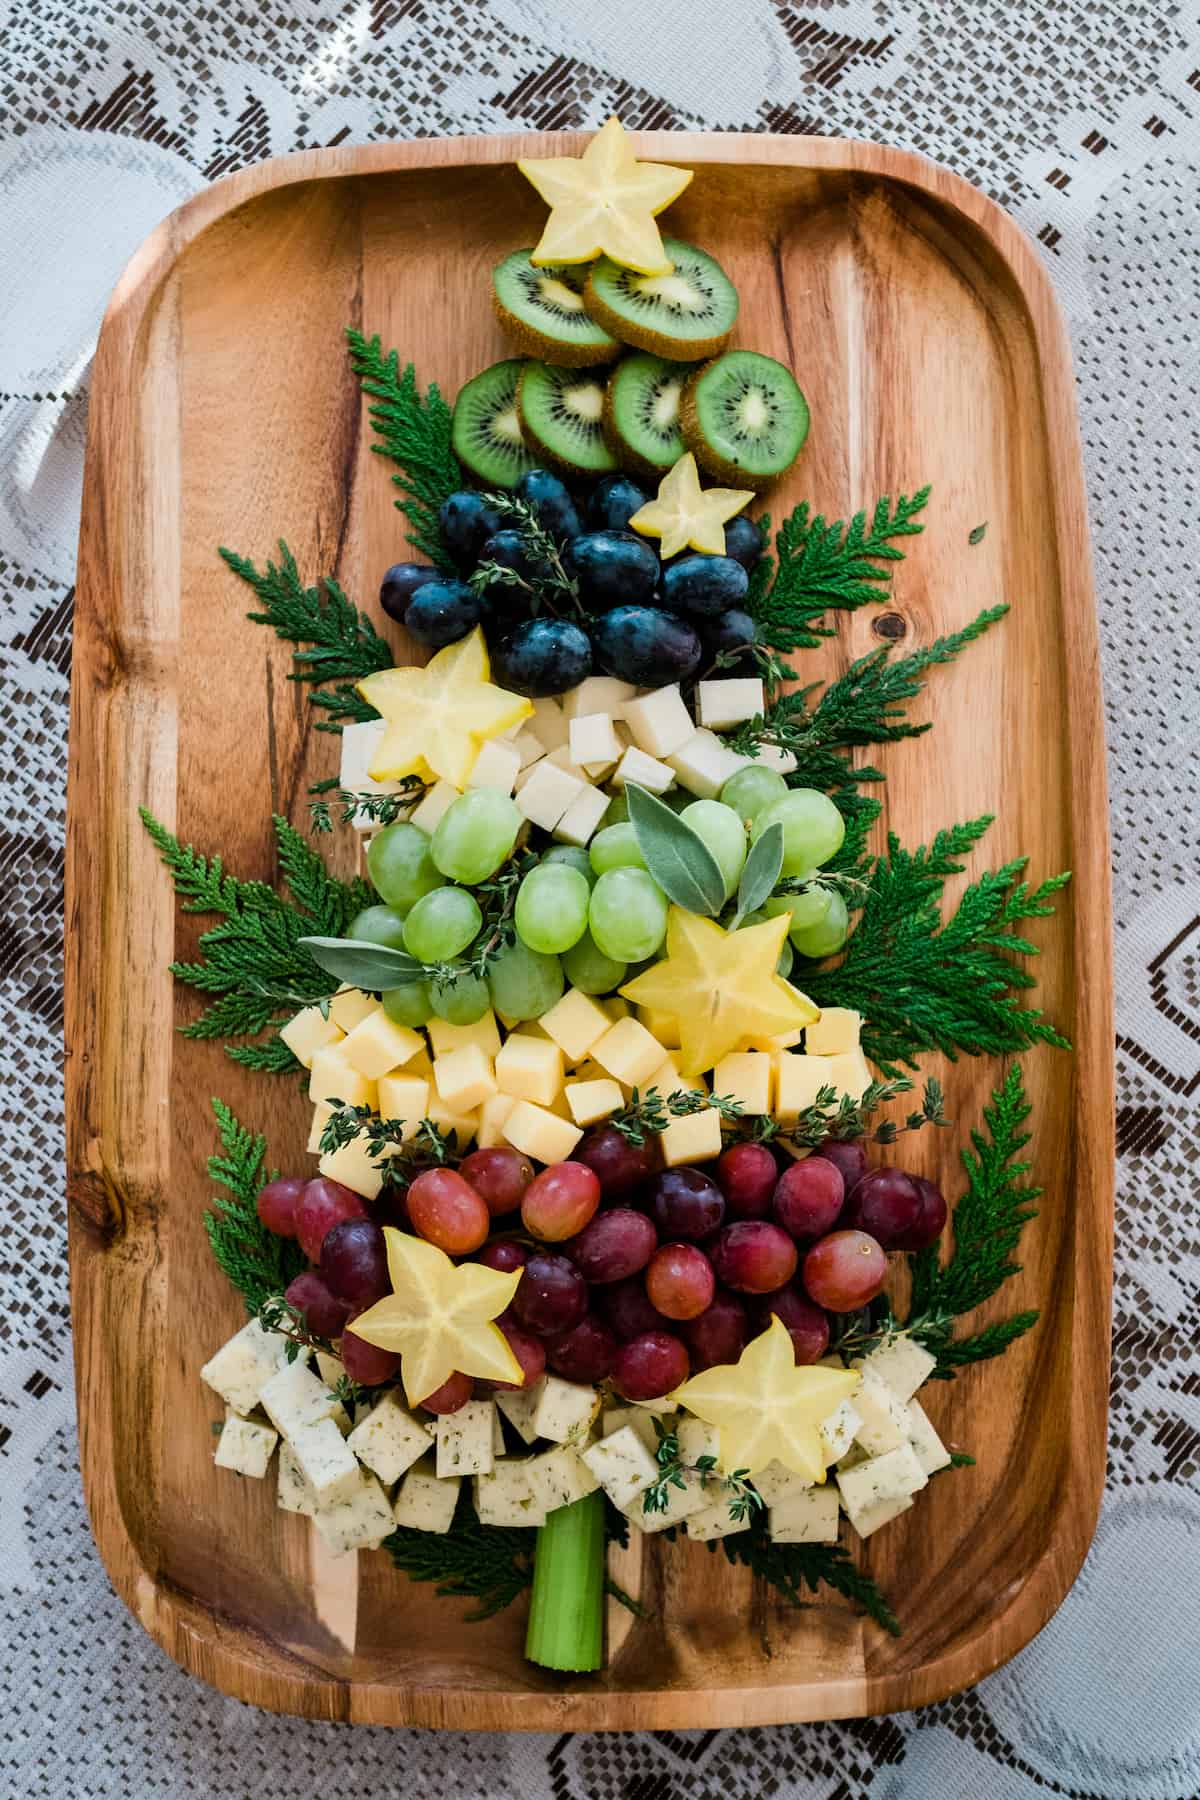 Christmas tree shaped cheese platter on a wooden tray kiwi grapes star fruit and cheese surrounded by evergreen branches. 